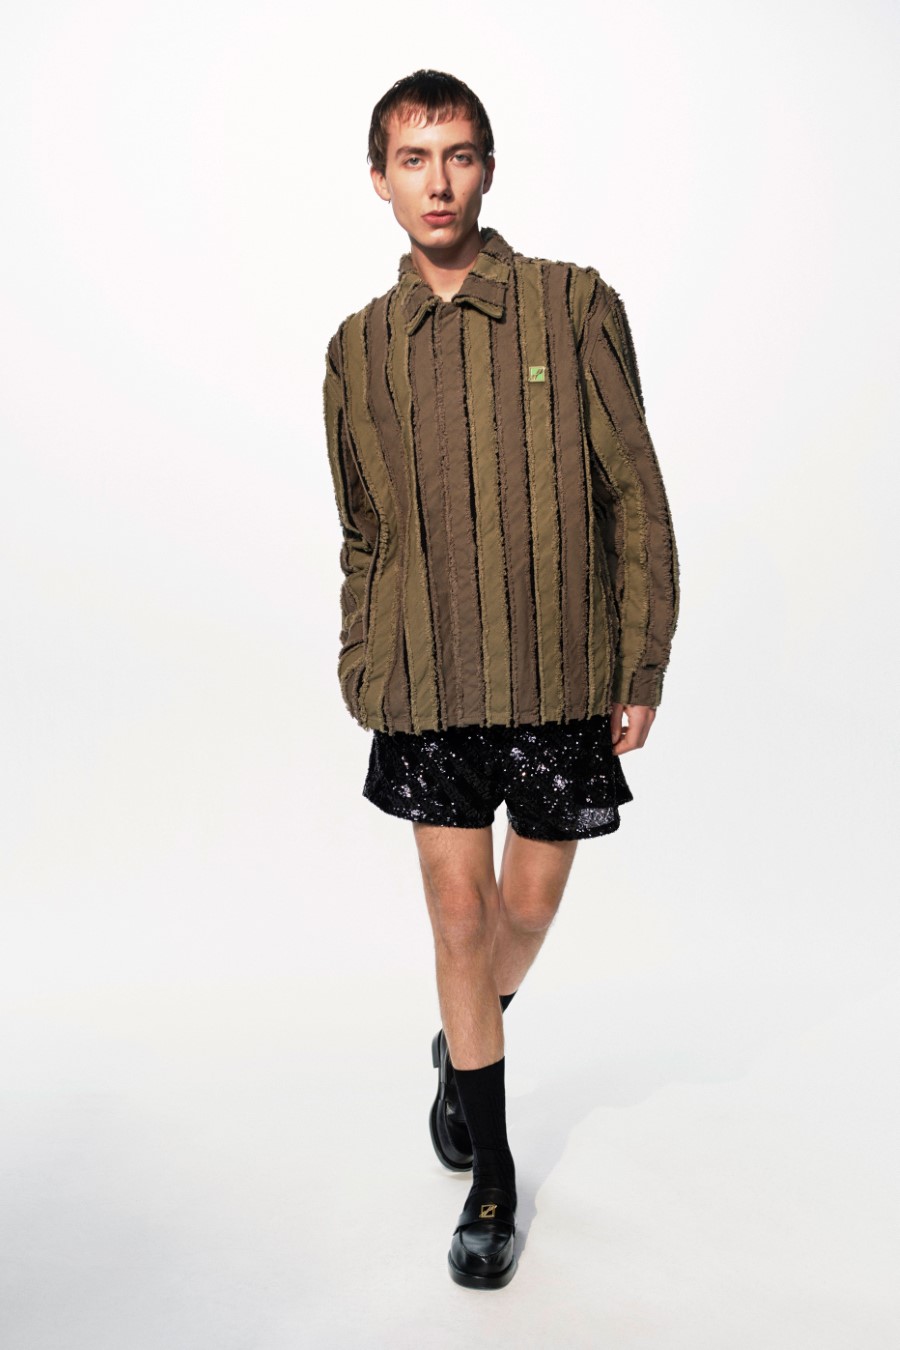 WE11DONE Women's Spring-Summer 2021 and Men's Pre-Fall 2021 Lookbook